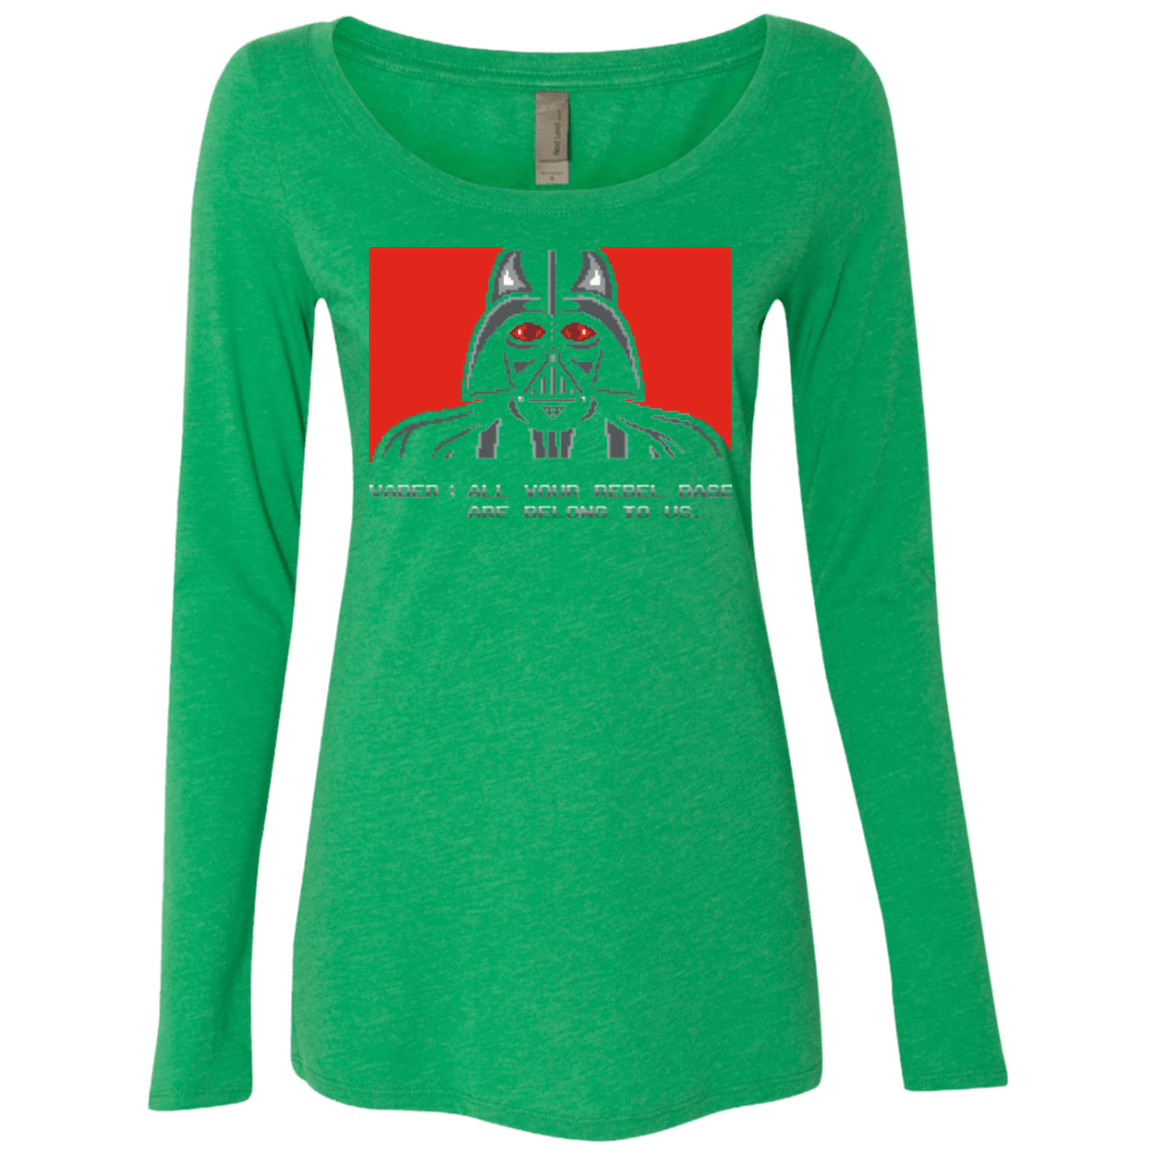 T-Shirts Envy / Small All your rebel base are belongs to us Women's Triblend Long Sleeve Shirt